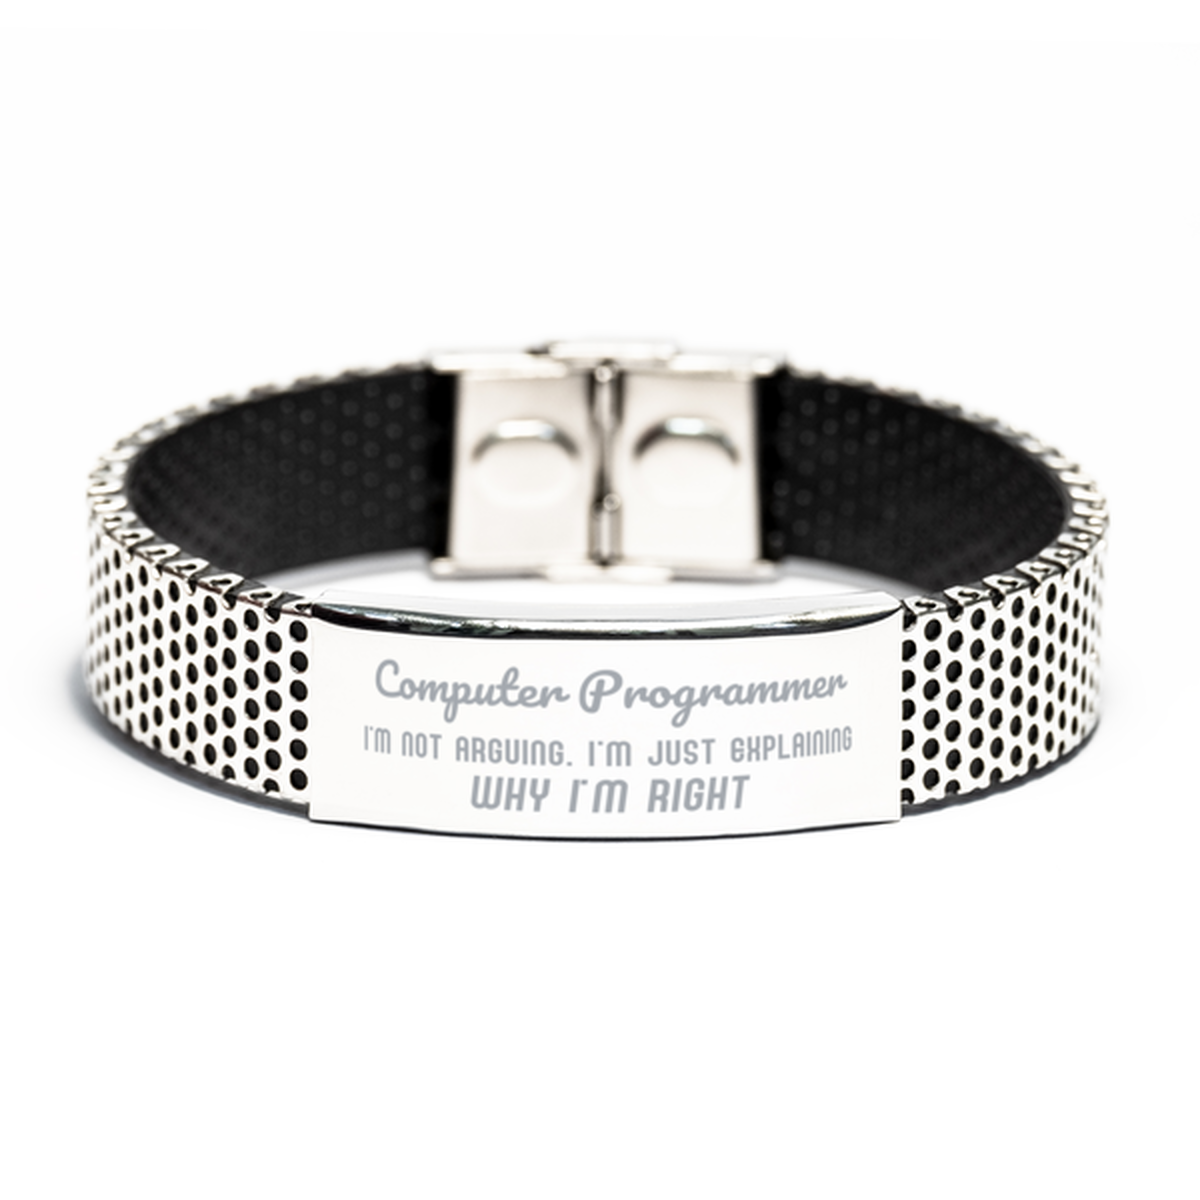 Computer Programmer I'm not Arguing. I'm Just Explaining Why I'm RIGHT Stainless Steel Bracelet, Funny Saying Quote Computer Programmer Gifts For Computer Programmer Graduation Birthday Christmas Gifts for Men Women Coworker